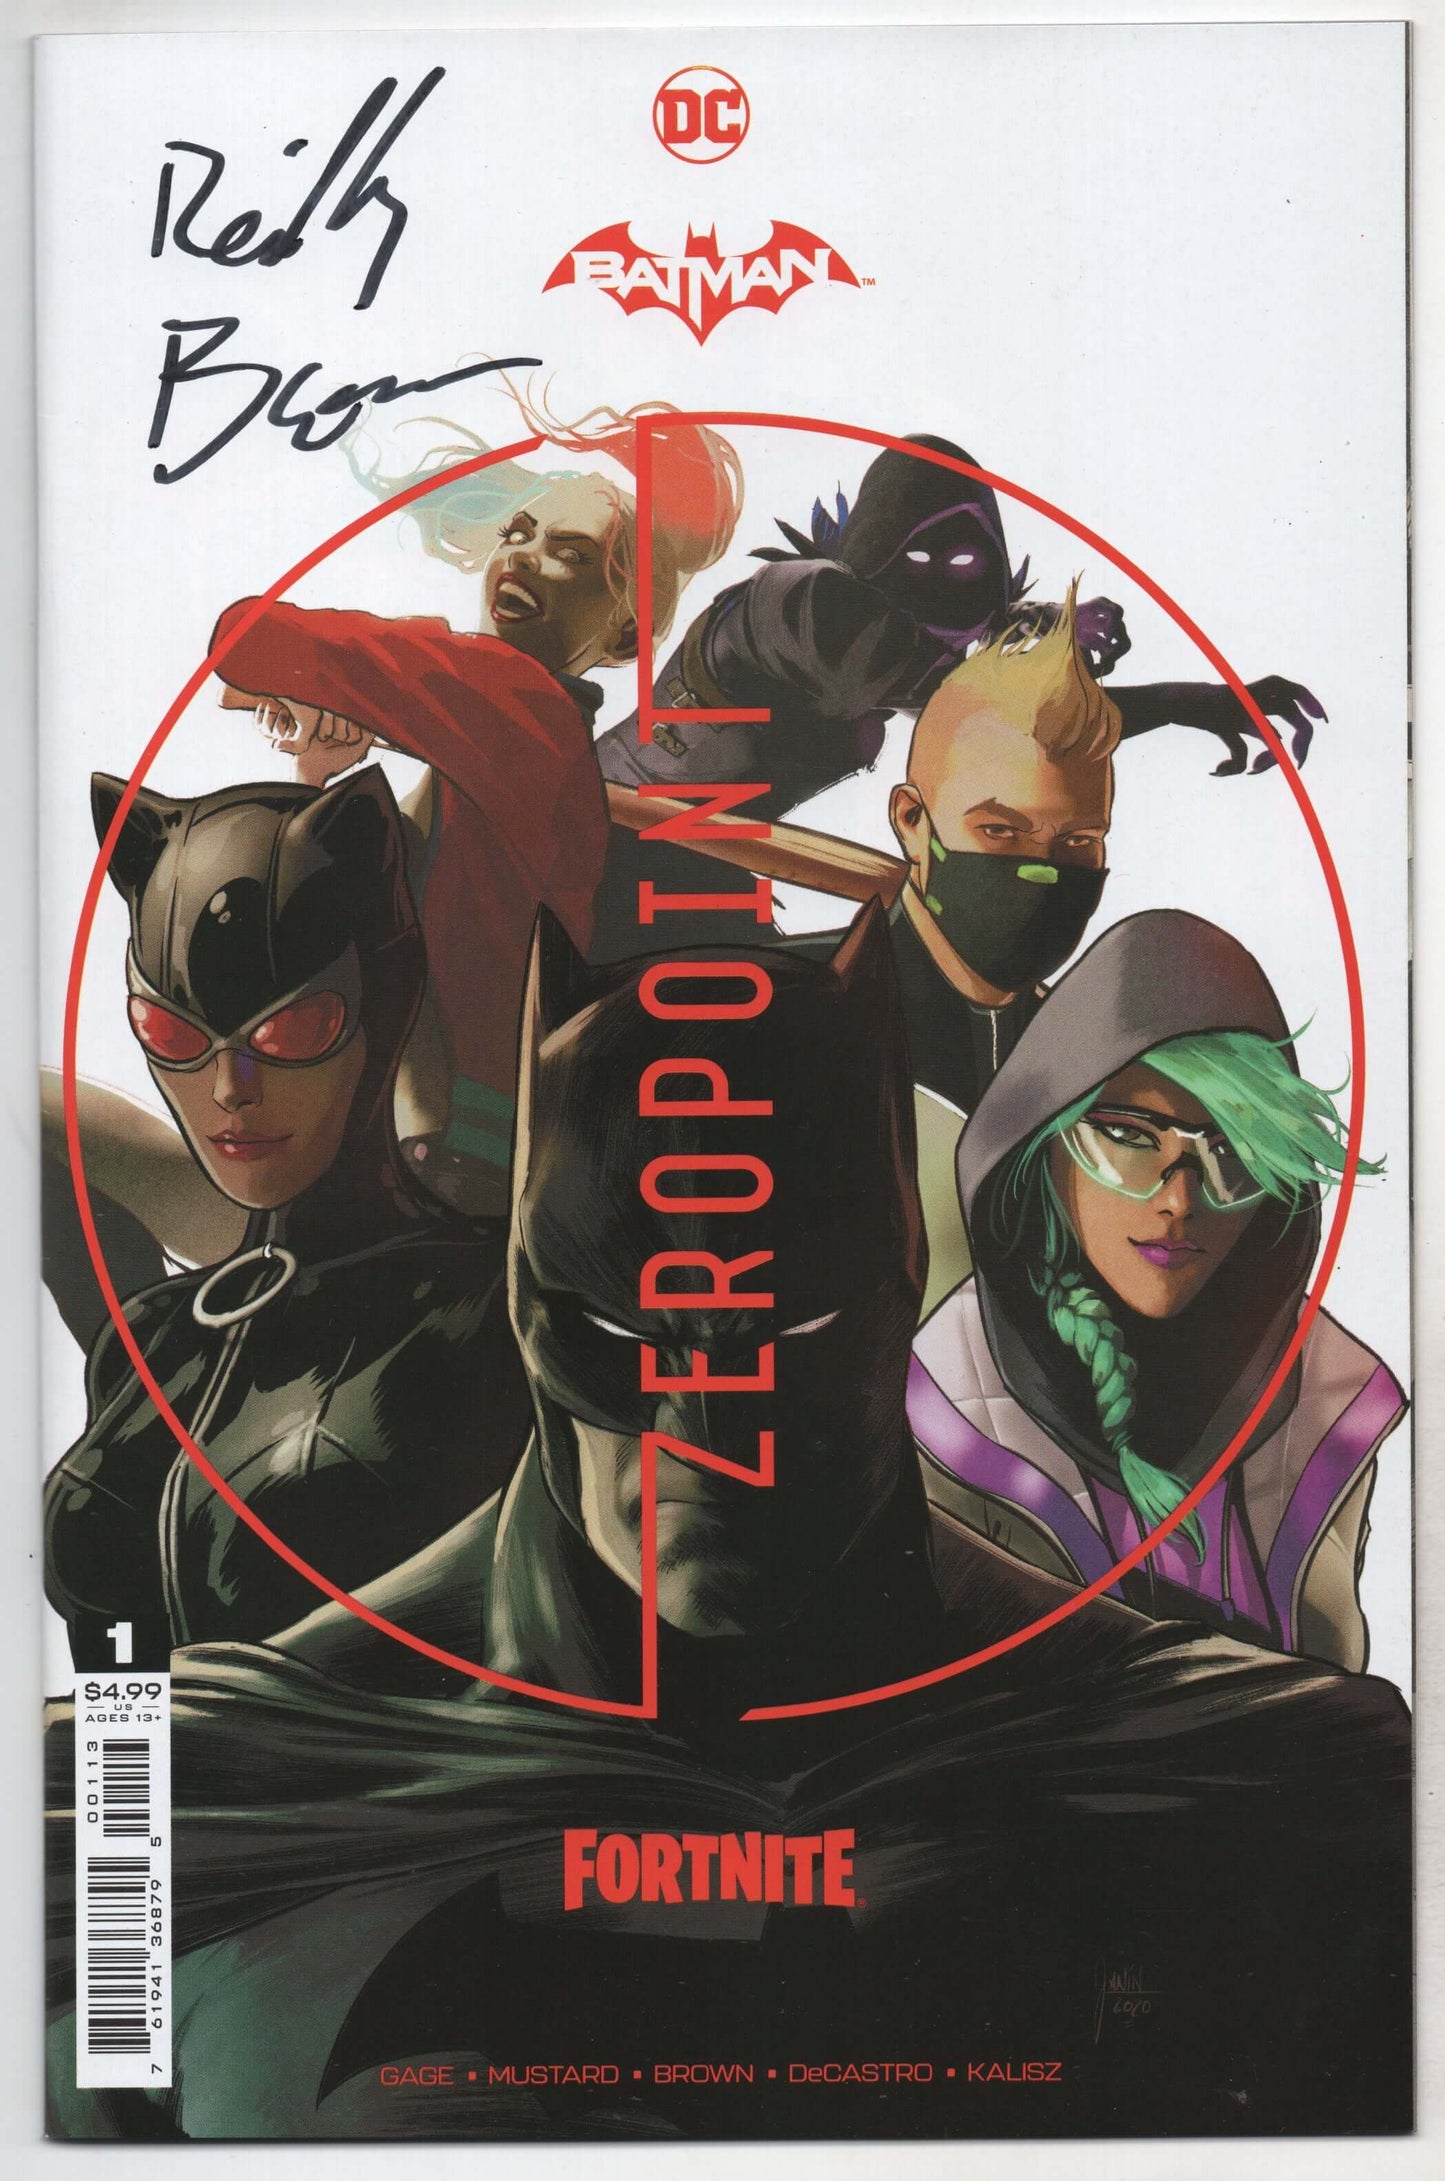 Batman Fortnite Zero Point #1 3rd Print Mikel Janin Variant SIGNED Reilly Brown (06/01/2021) Dc